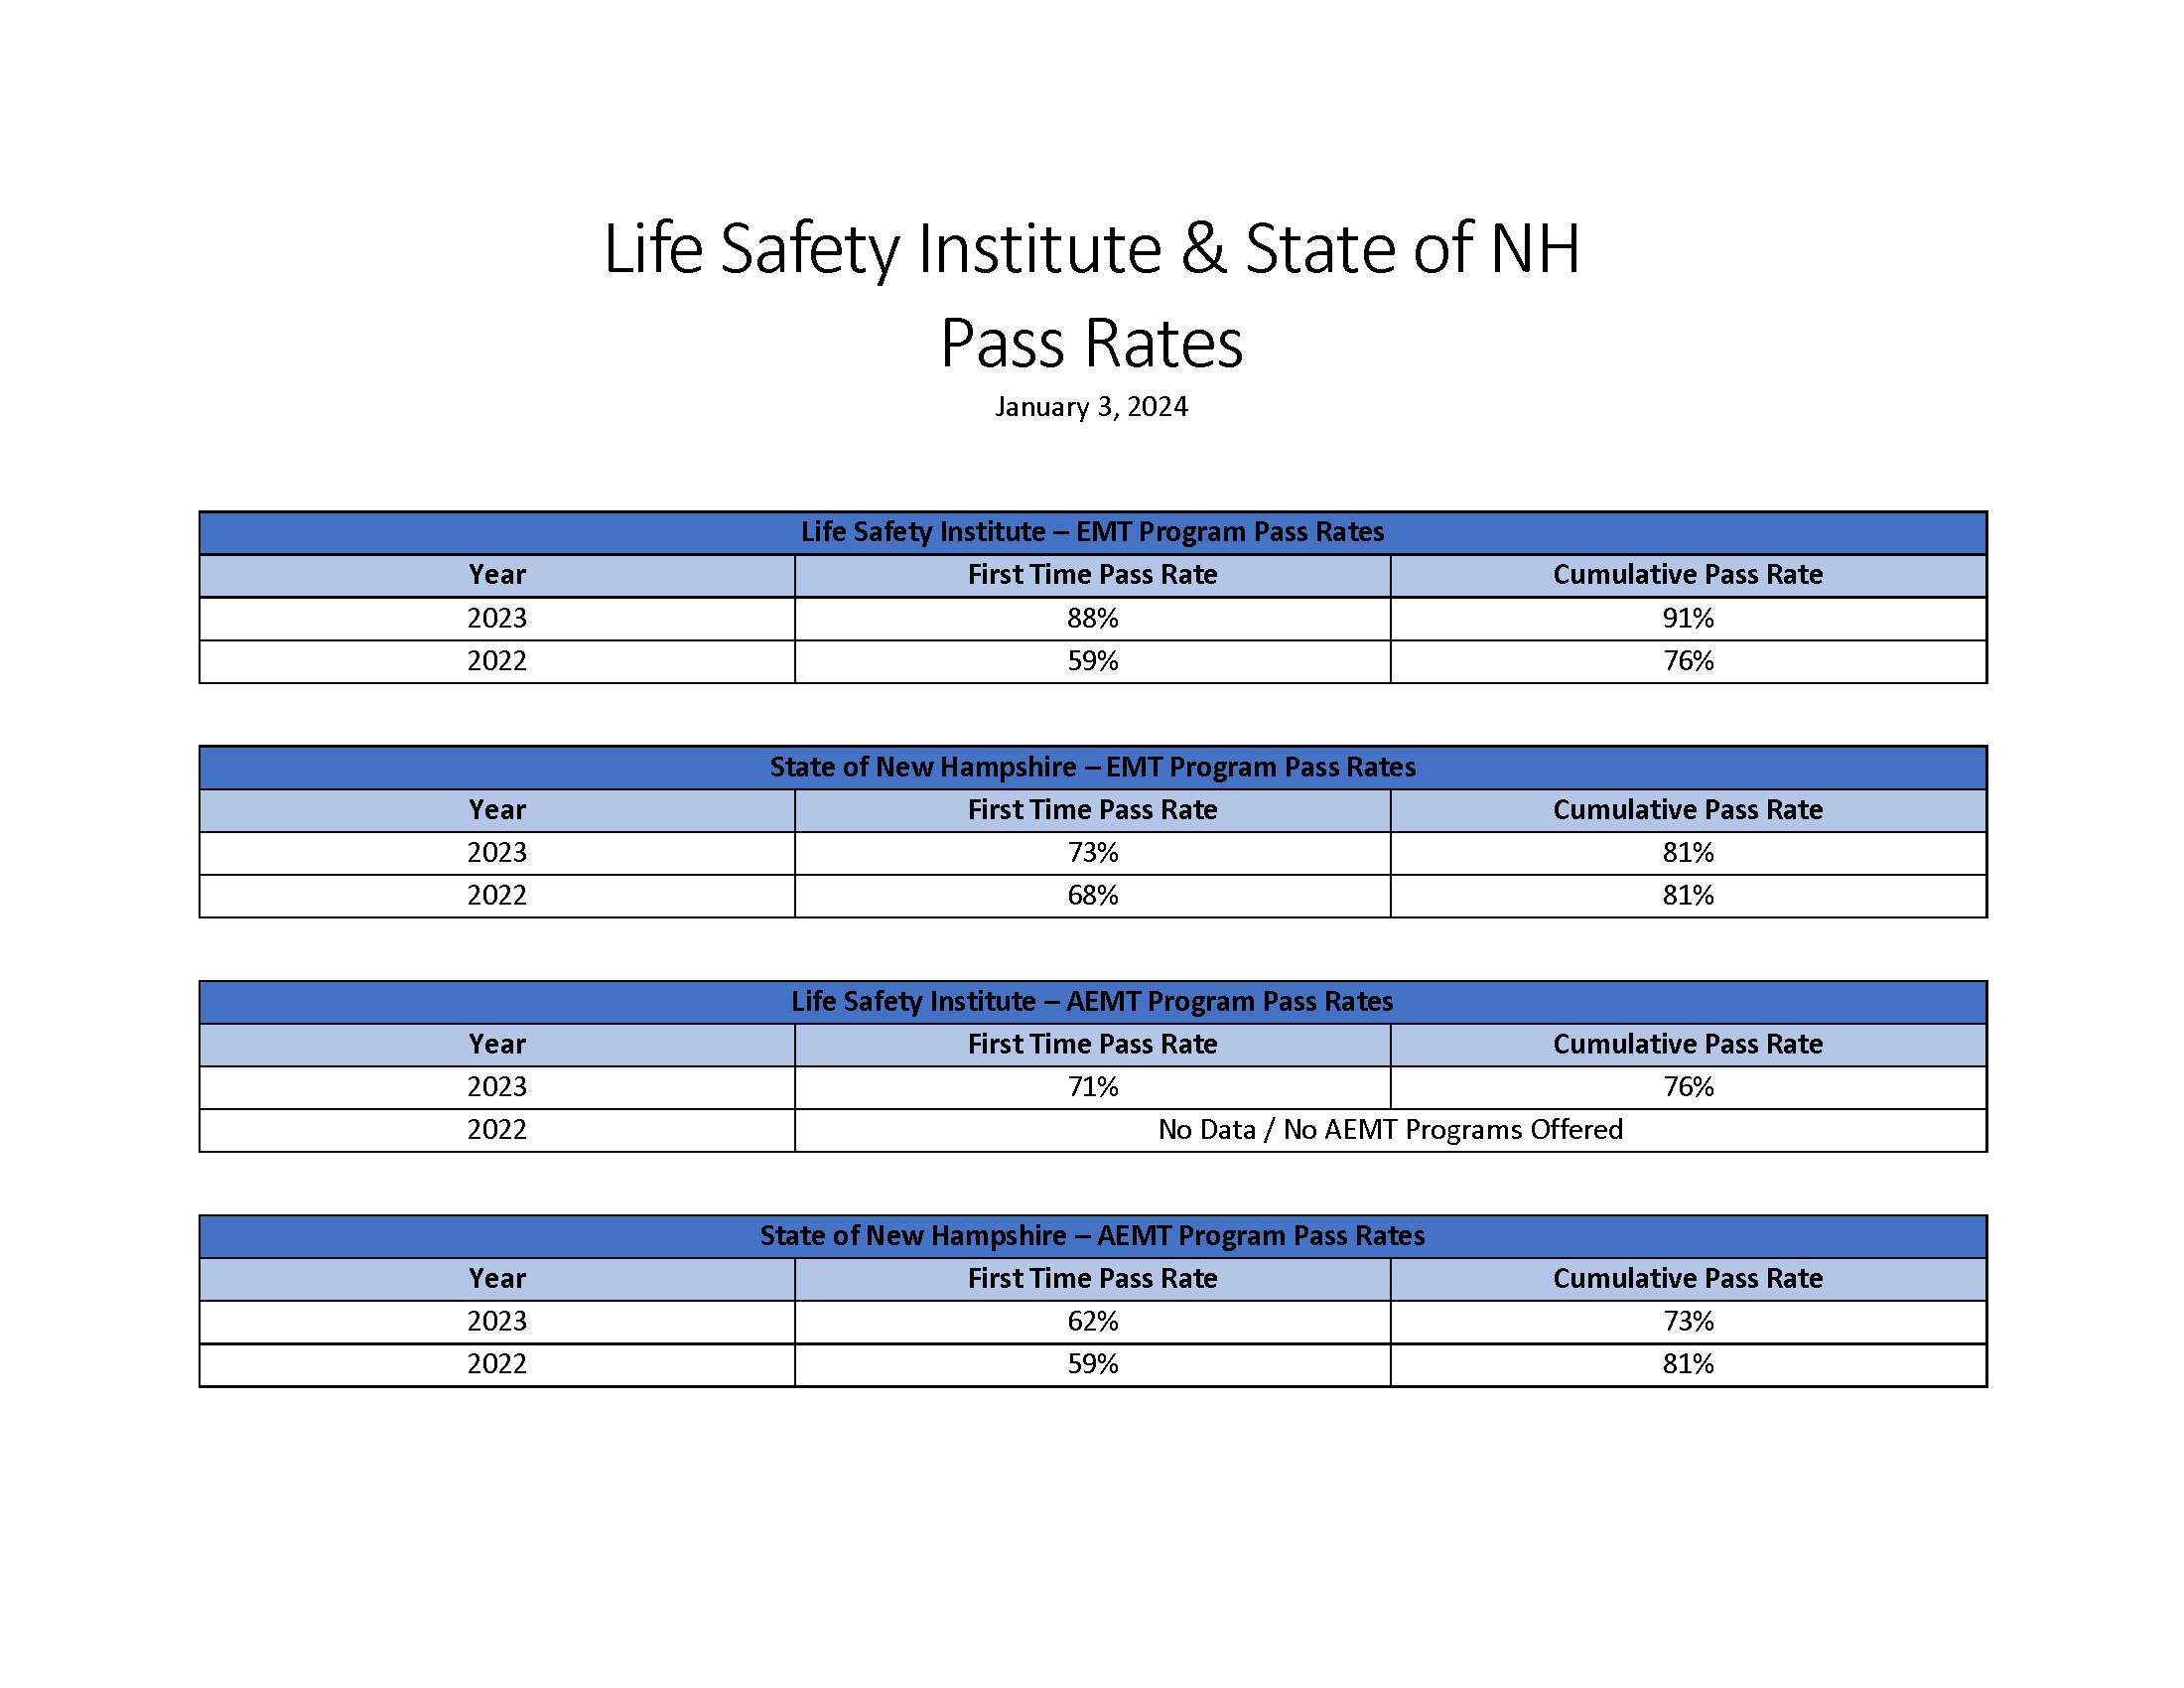 Pass Rates as of January 3rd 2024 for Life Safety Institute and the State of New Hampshire